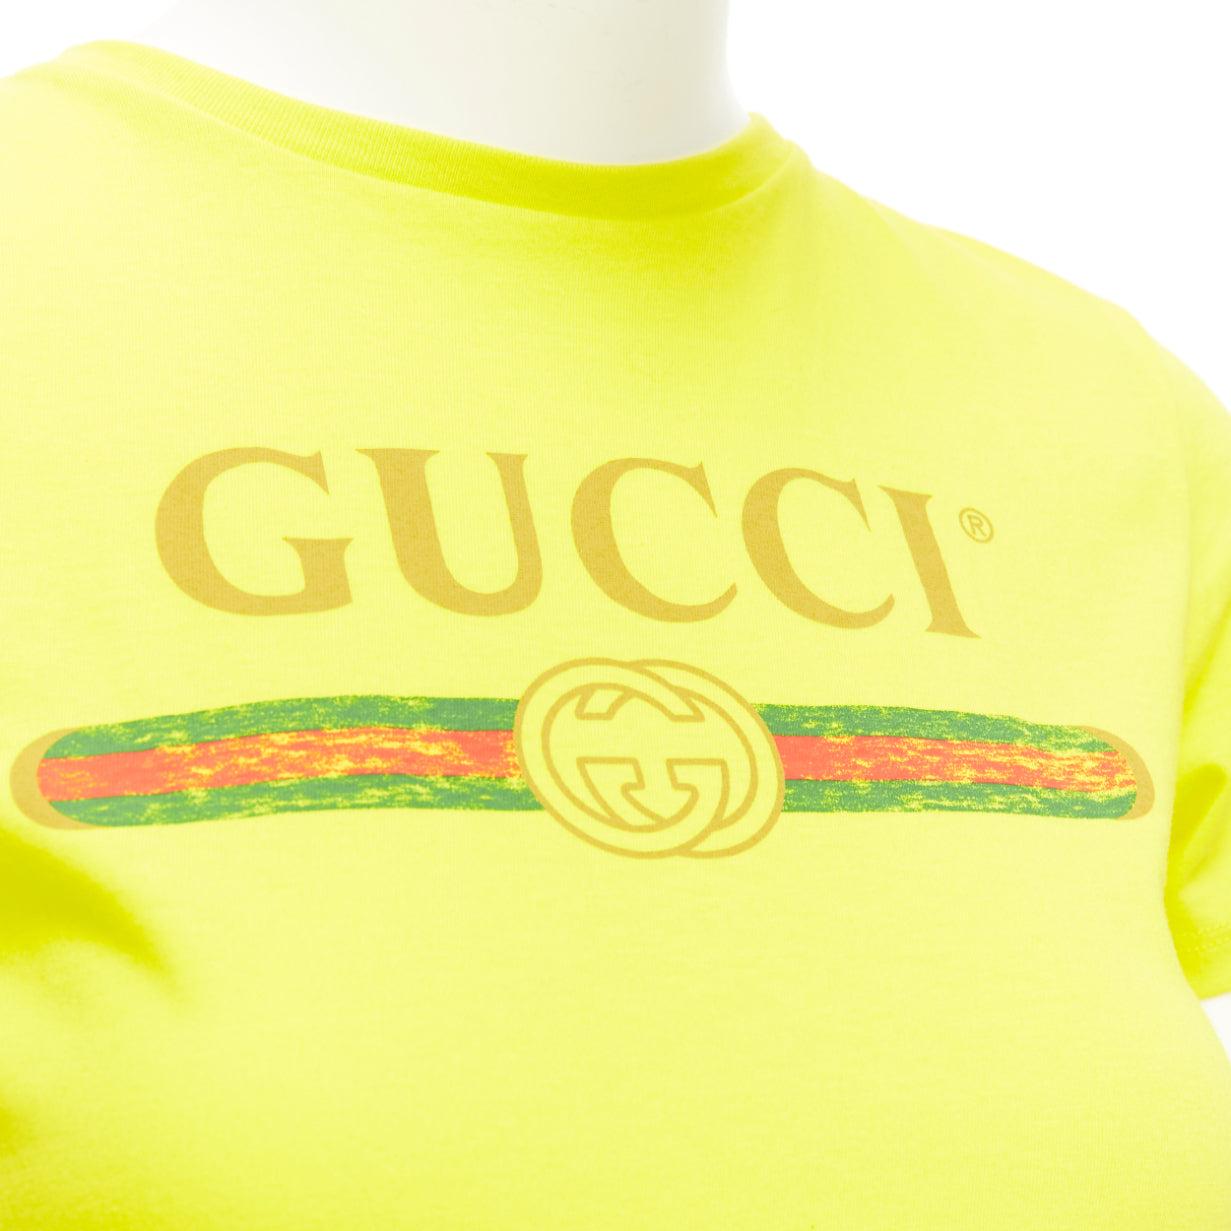 GUCCI KIDS bright yellow vintage logo crew neck tshirt 10Y XS
Reference: AAWC/A00759
Brand: Gucci
Designer: Alessandro Michele
Collection: Kidwear
Material: Cotton
Color: Yellow
Pattern: Solid
Closure: Slip On
Made in: Italy

CONDITION:
Condition: